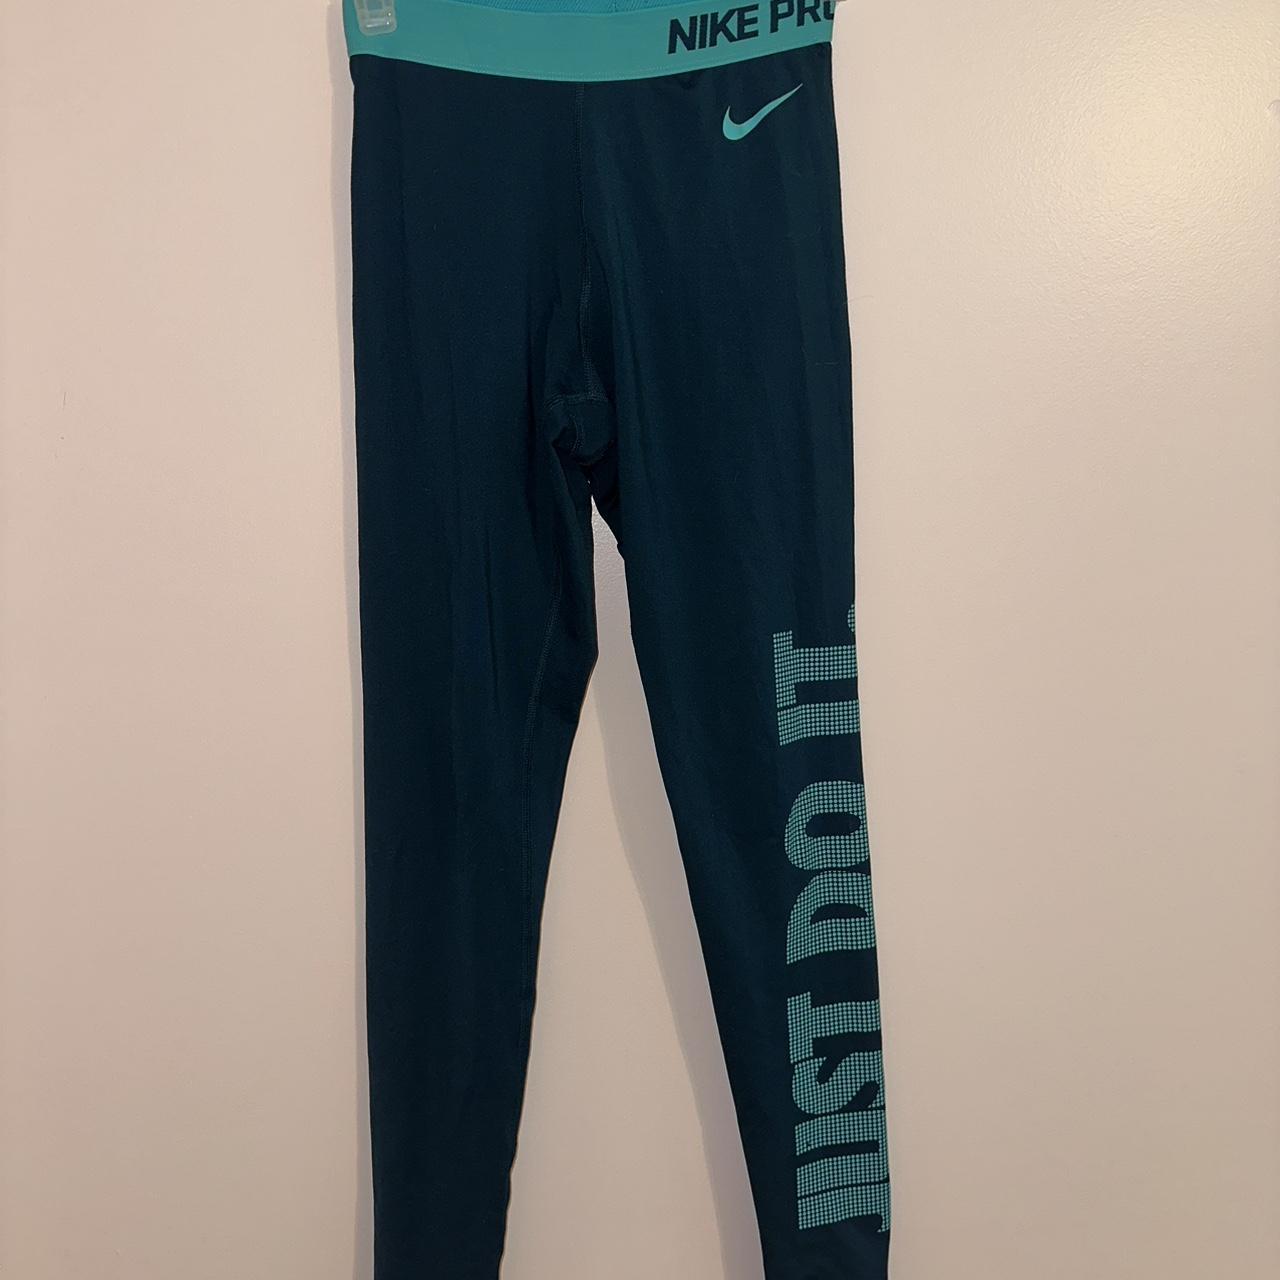 Teal Nike Pro's workout leggings, size XS, “JUST DO - Depop